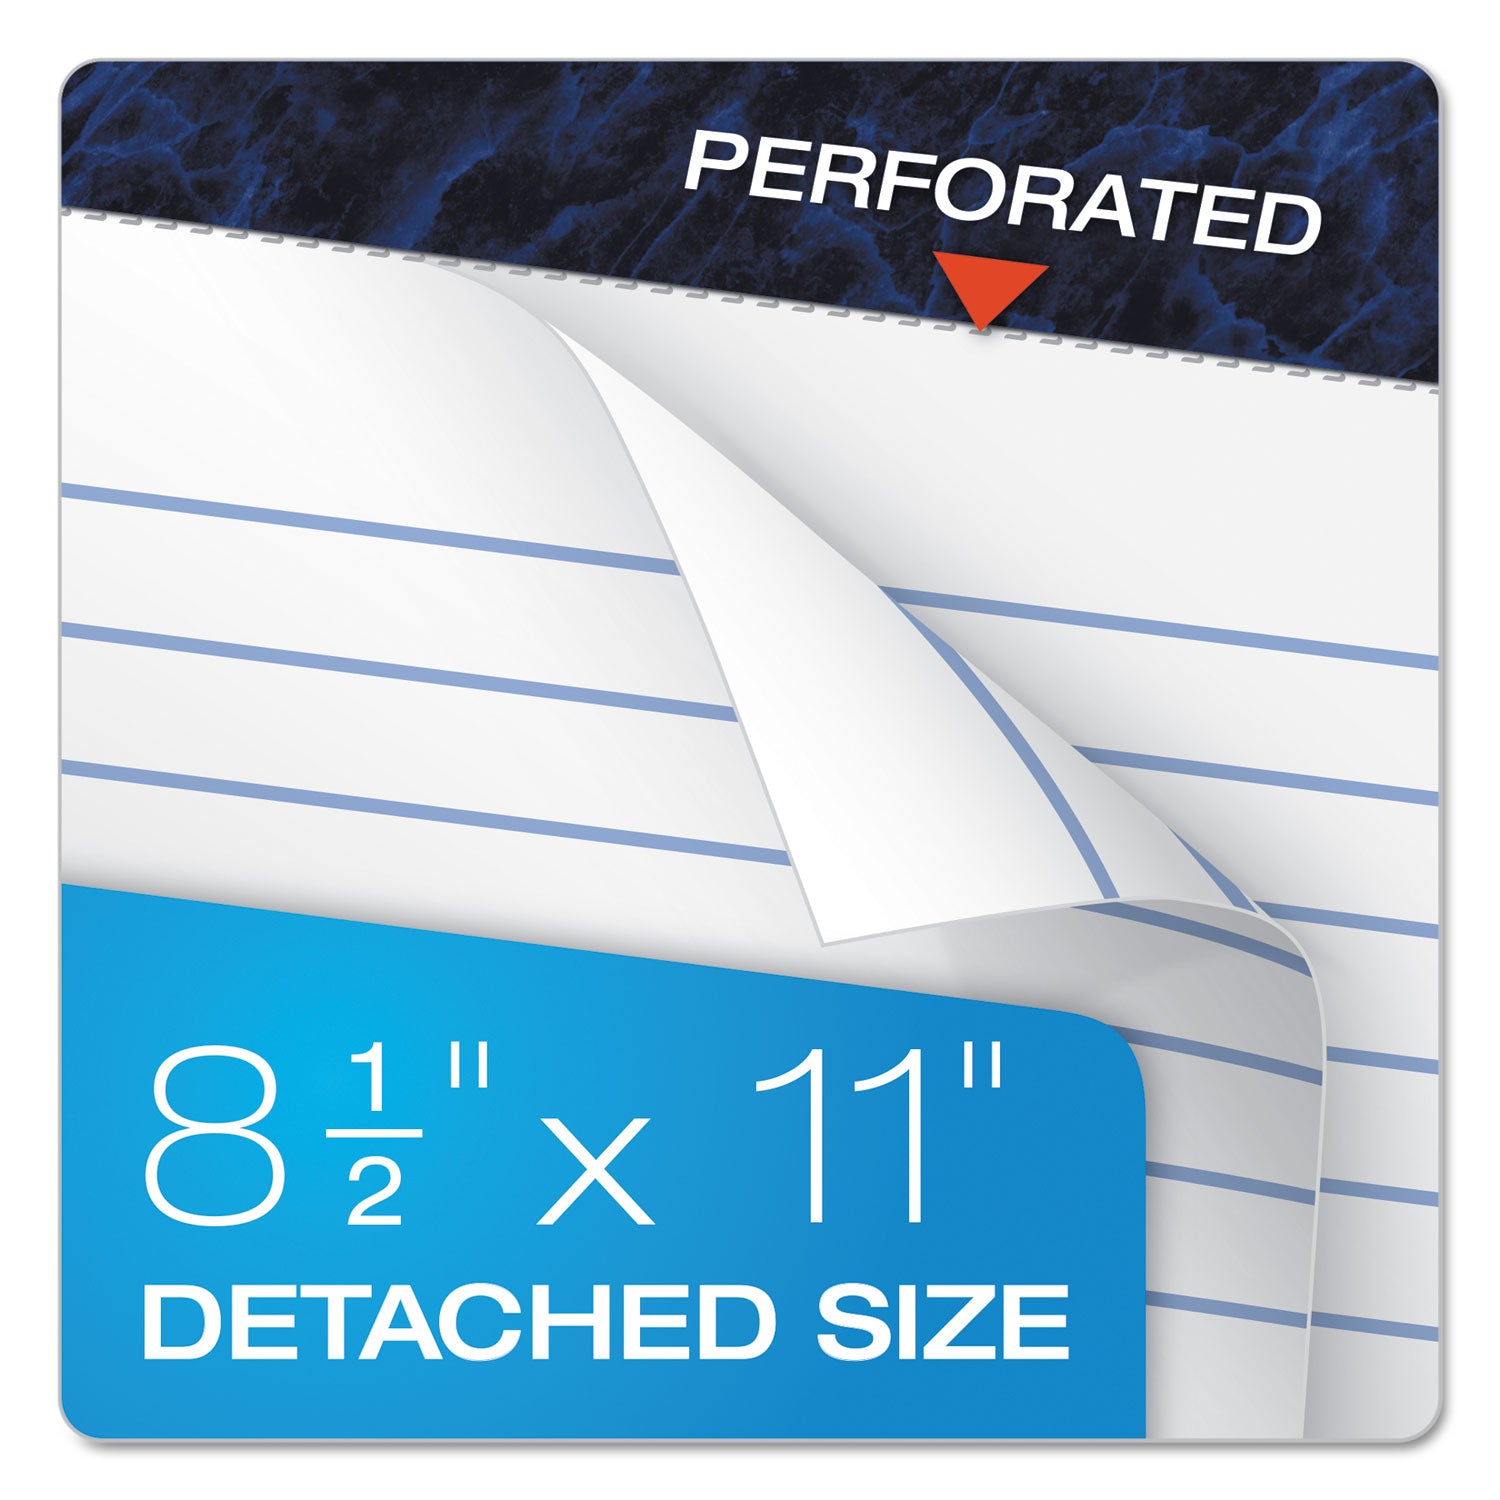 Gold Fibre Writing Pads, Wide/Legal Rule, 50 White 8.5 x 11.75 Sheets, 4/Pack - 